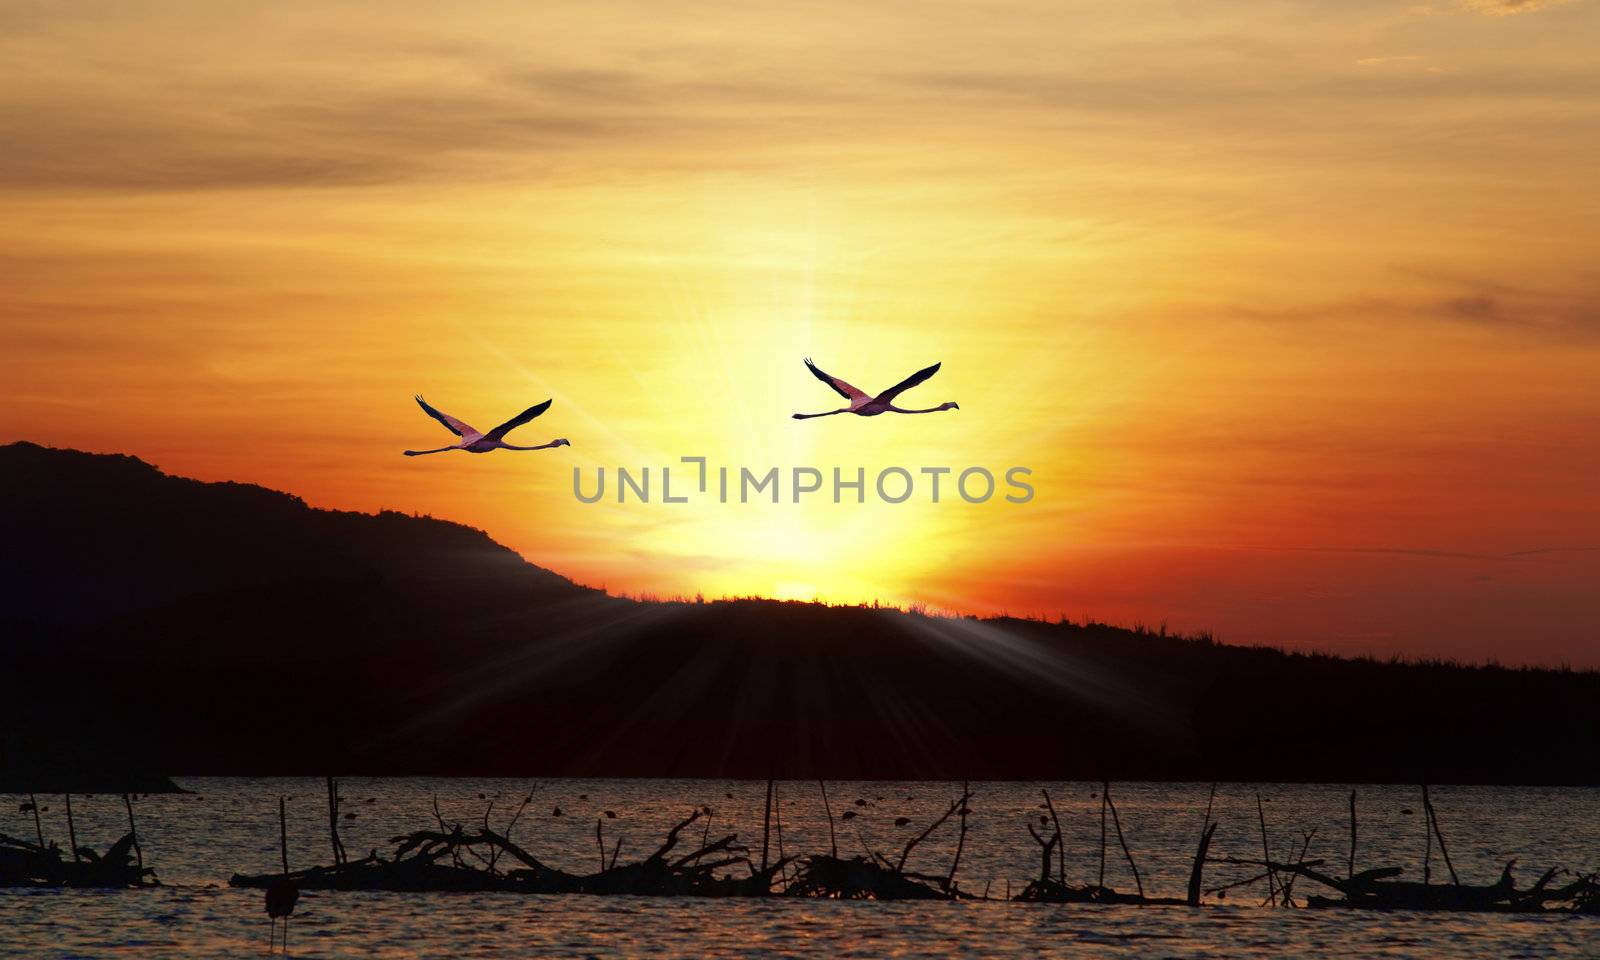 Flamingos flying in the sunset over the beautiful Lake Gotomeere

